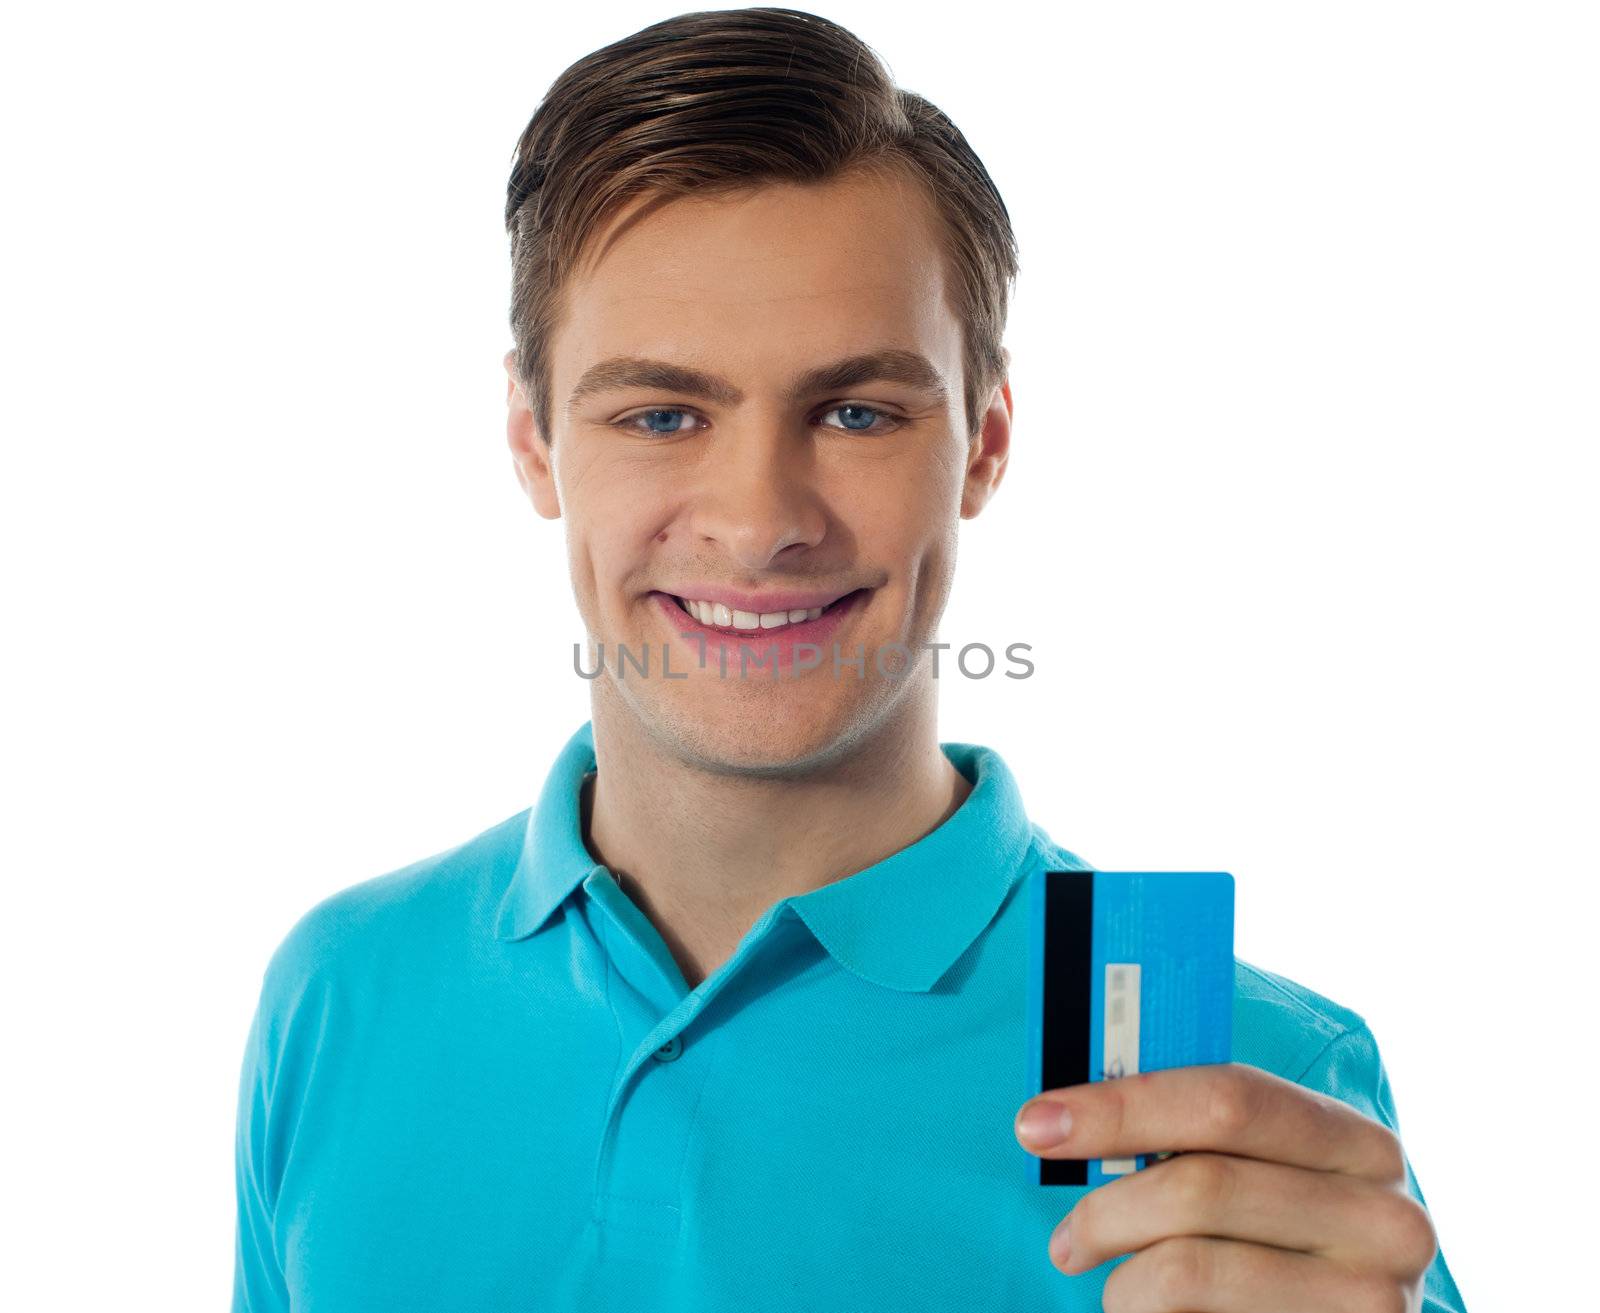 Fashionable young guy posing with debit card against white background